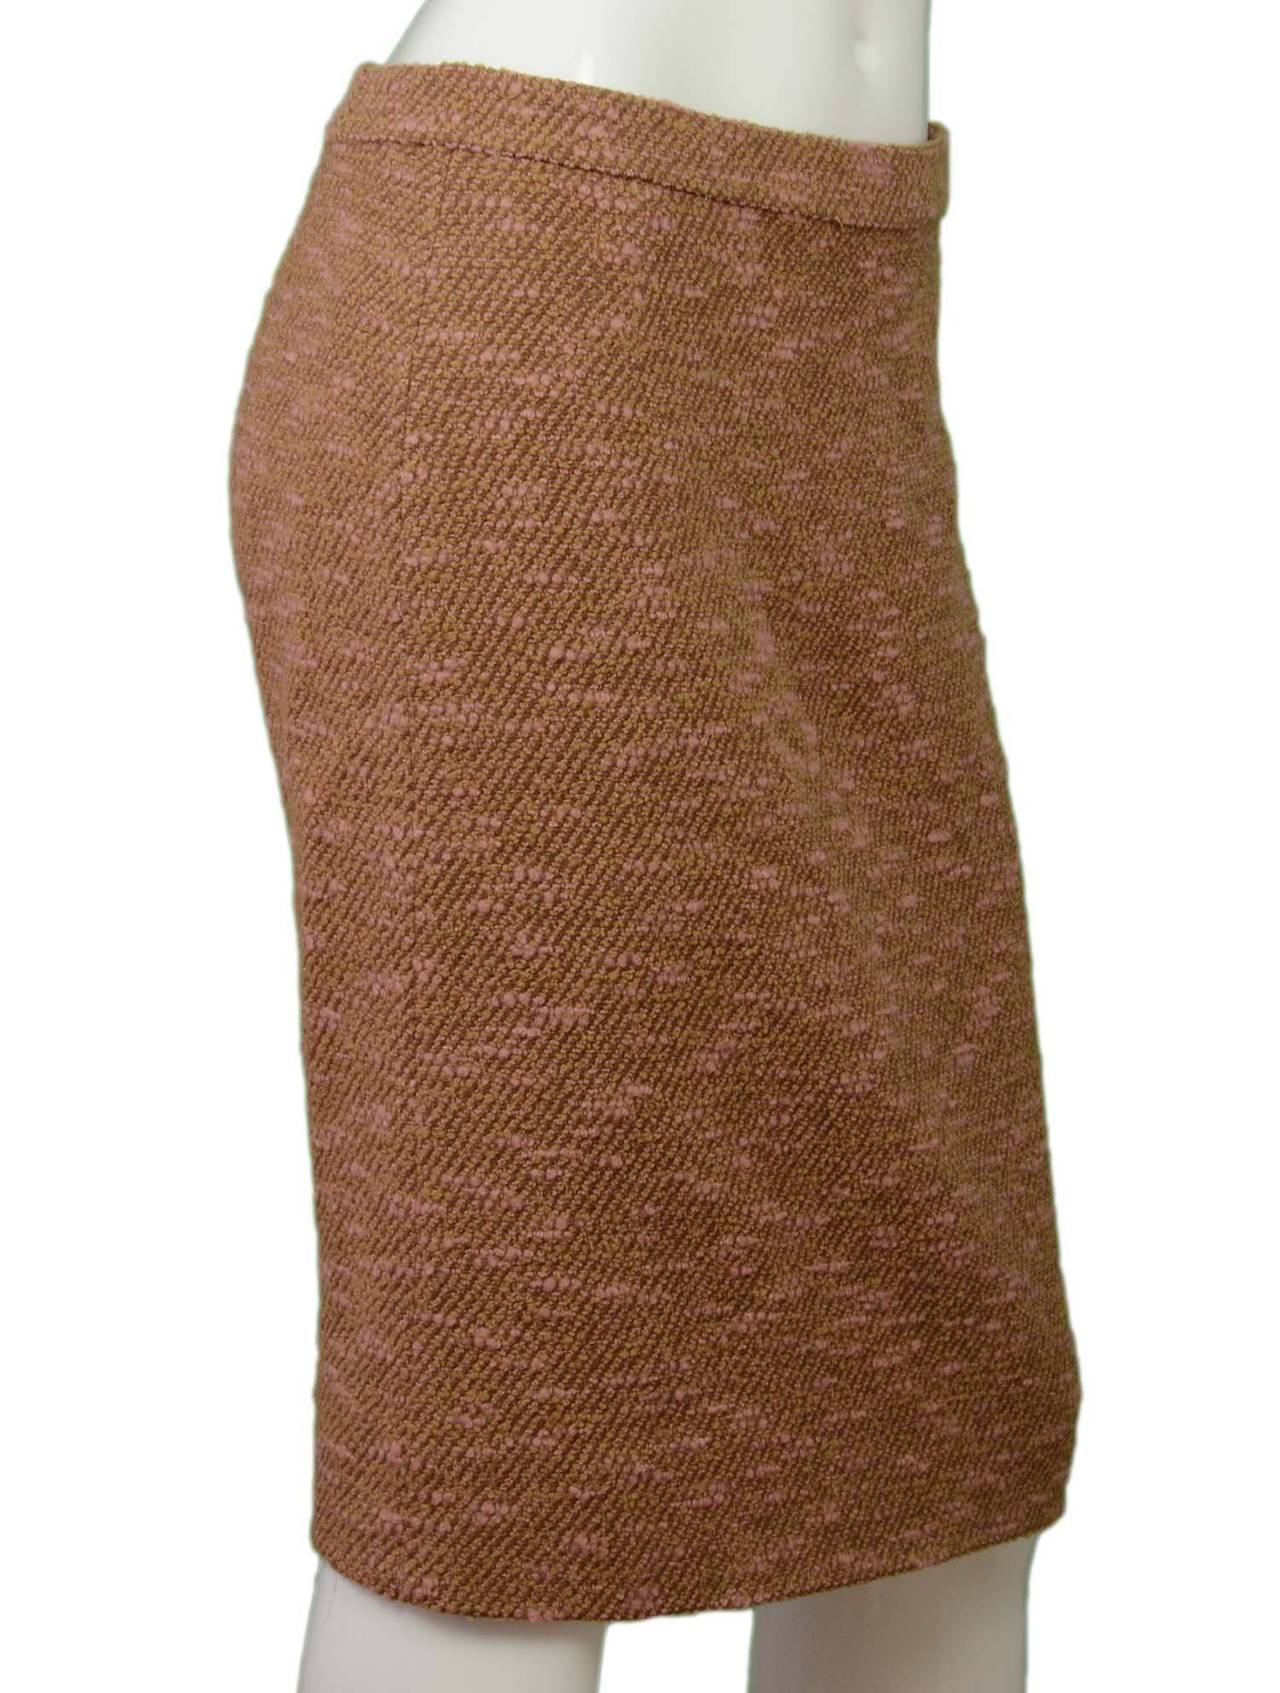 Chanel Vintage '96 Pink & Camel Boucle Skirt

    Made in: France
    Year of Production: 1996
    Color: Pink and camel
    Composition: 96% wool, 4% nylon
    Lining: Tan, 95% silk, 5% spandex
    Closure/opening: Back center zipper and